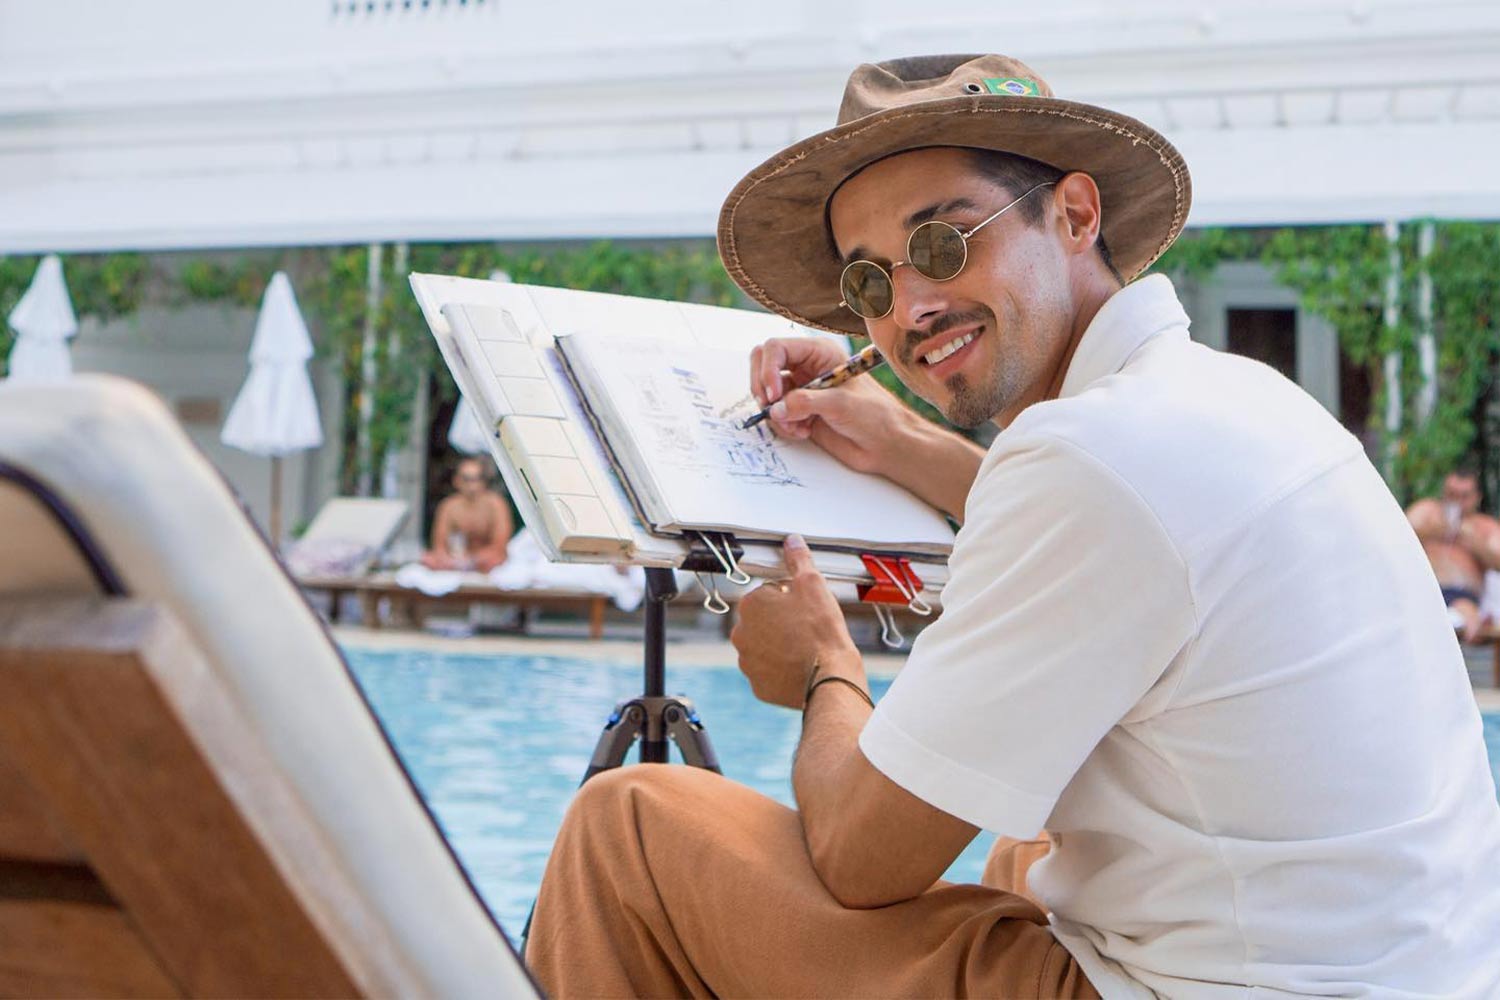 Artist, Alán Ramiro Manning, sketches in shades and a hat by the pool